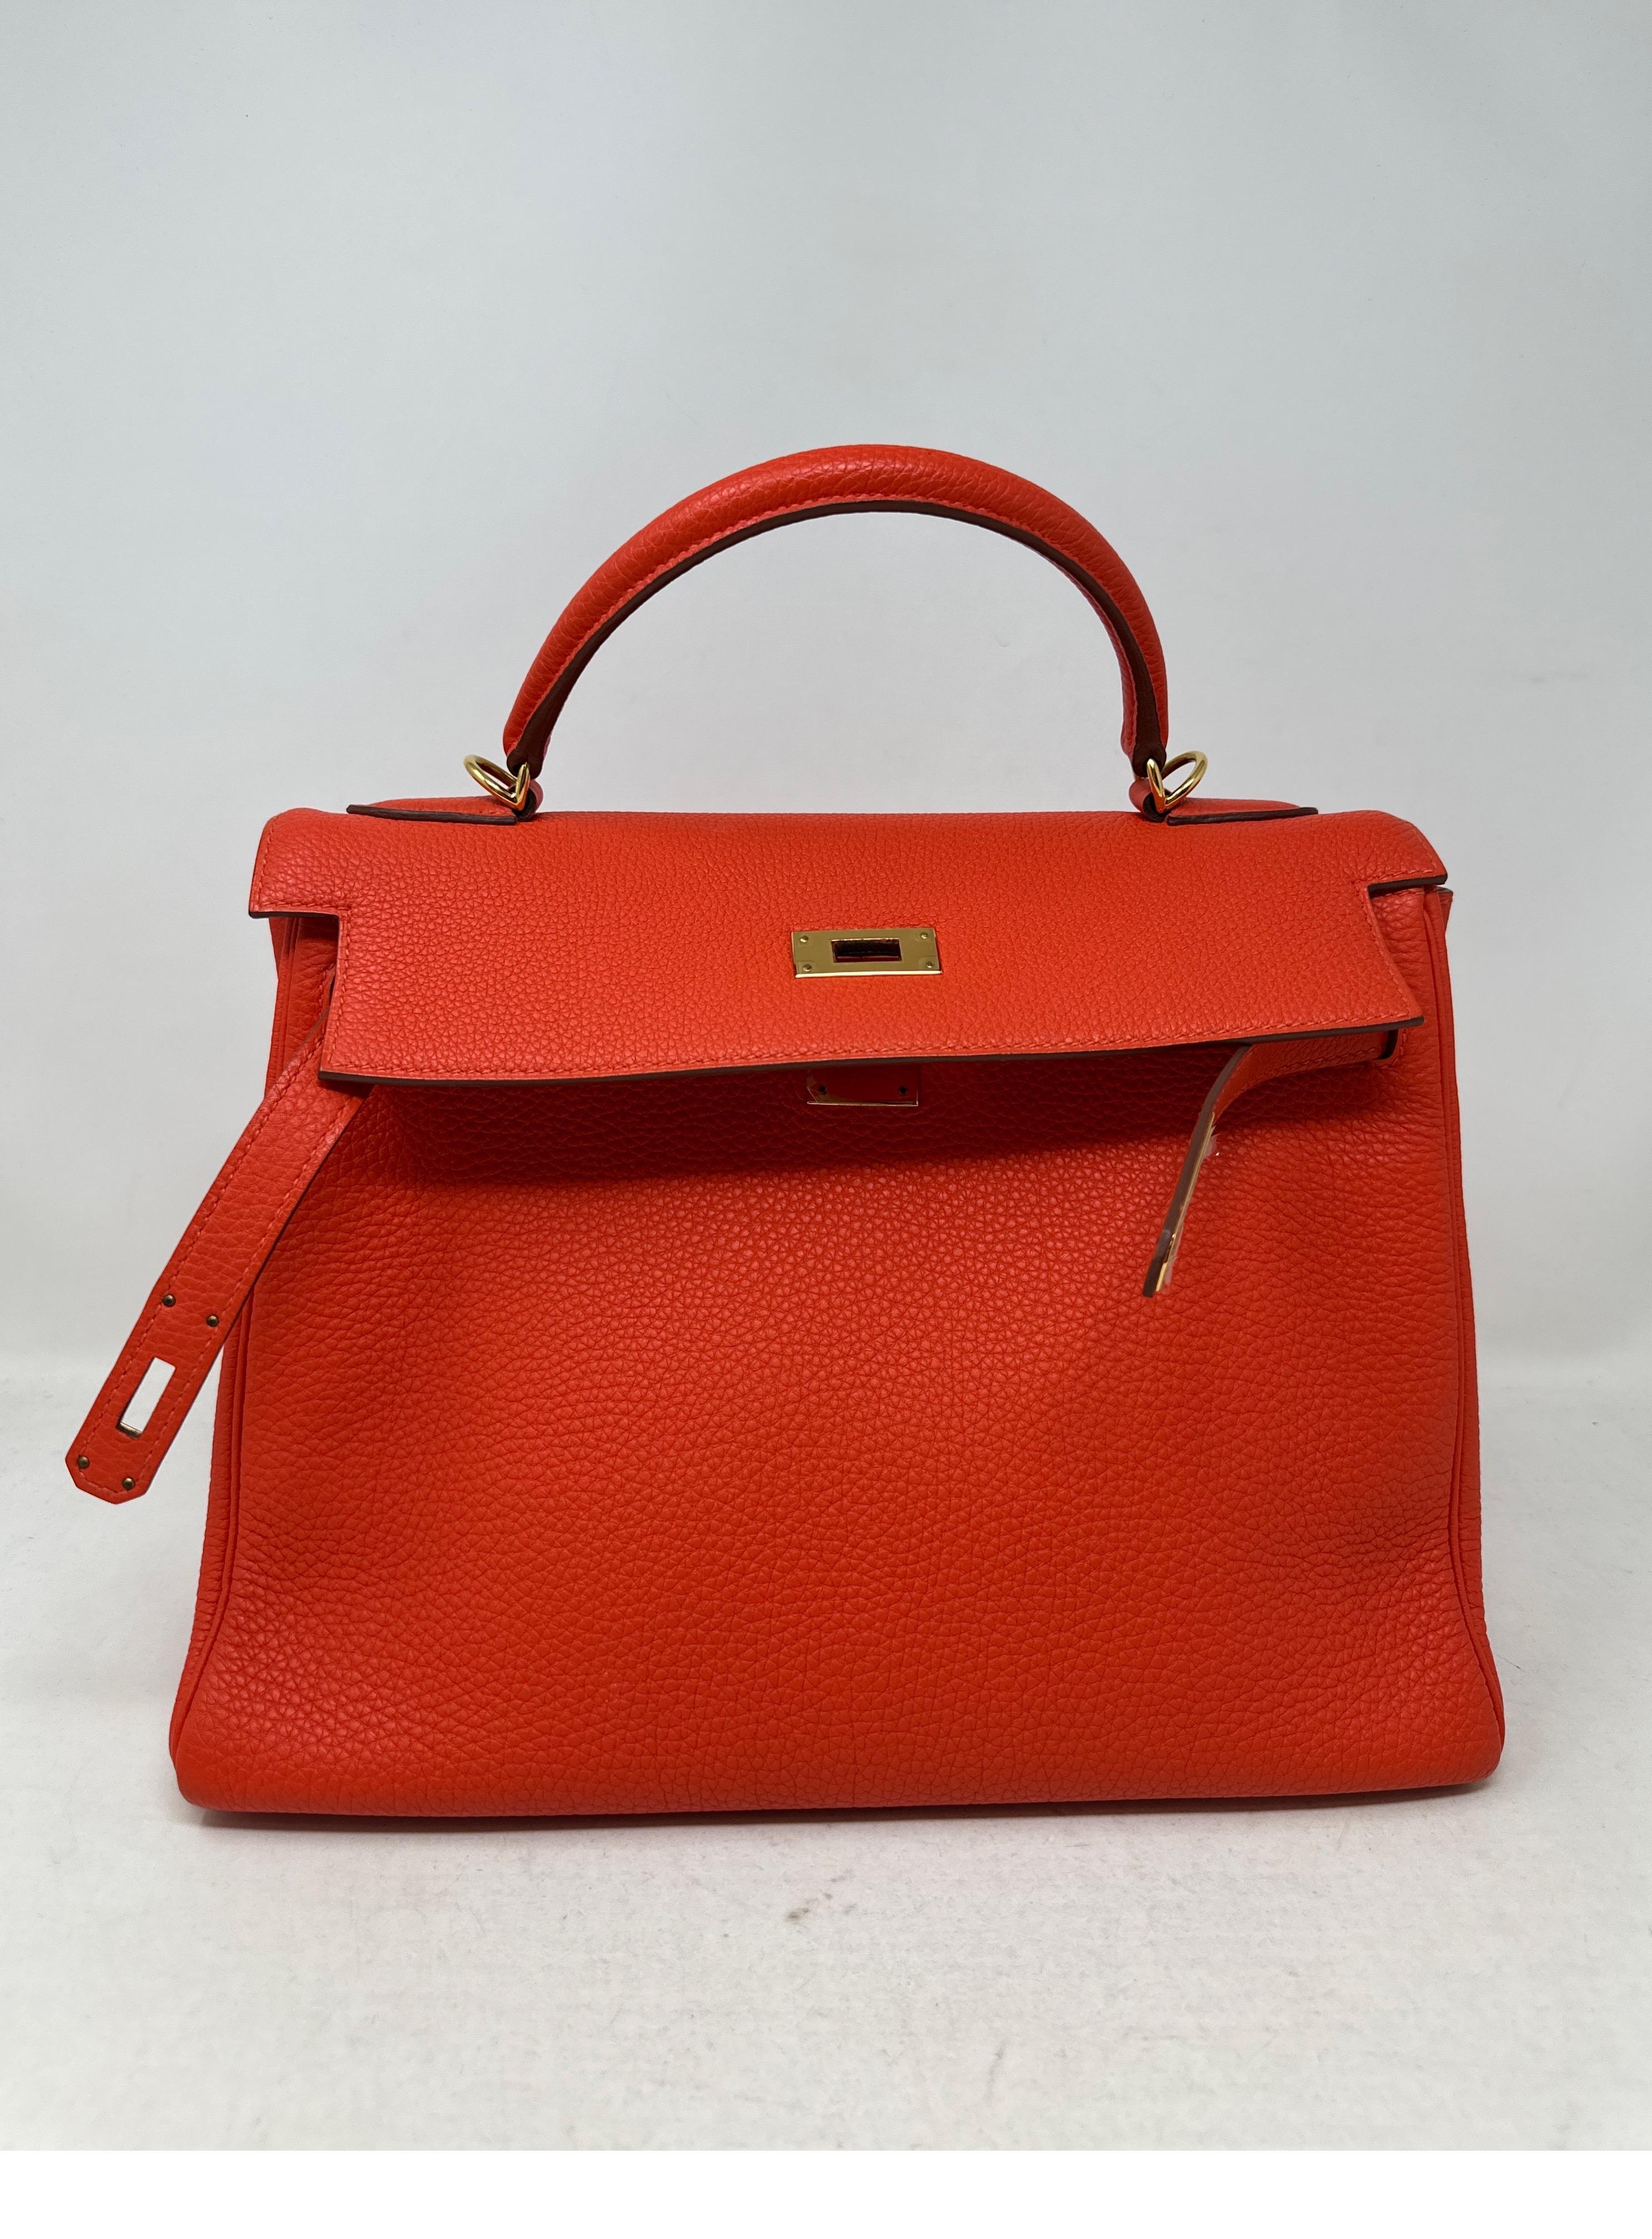 Hermes Capucine Kelly 32 Bag. Gorgeous poppy orange red color. Looks like new. Excellent condition. Togo leather. Gold hardware. Very vibrant color that pops. Kelly are high in demand now. Interior is so clean. Looks like it was never used. Includes